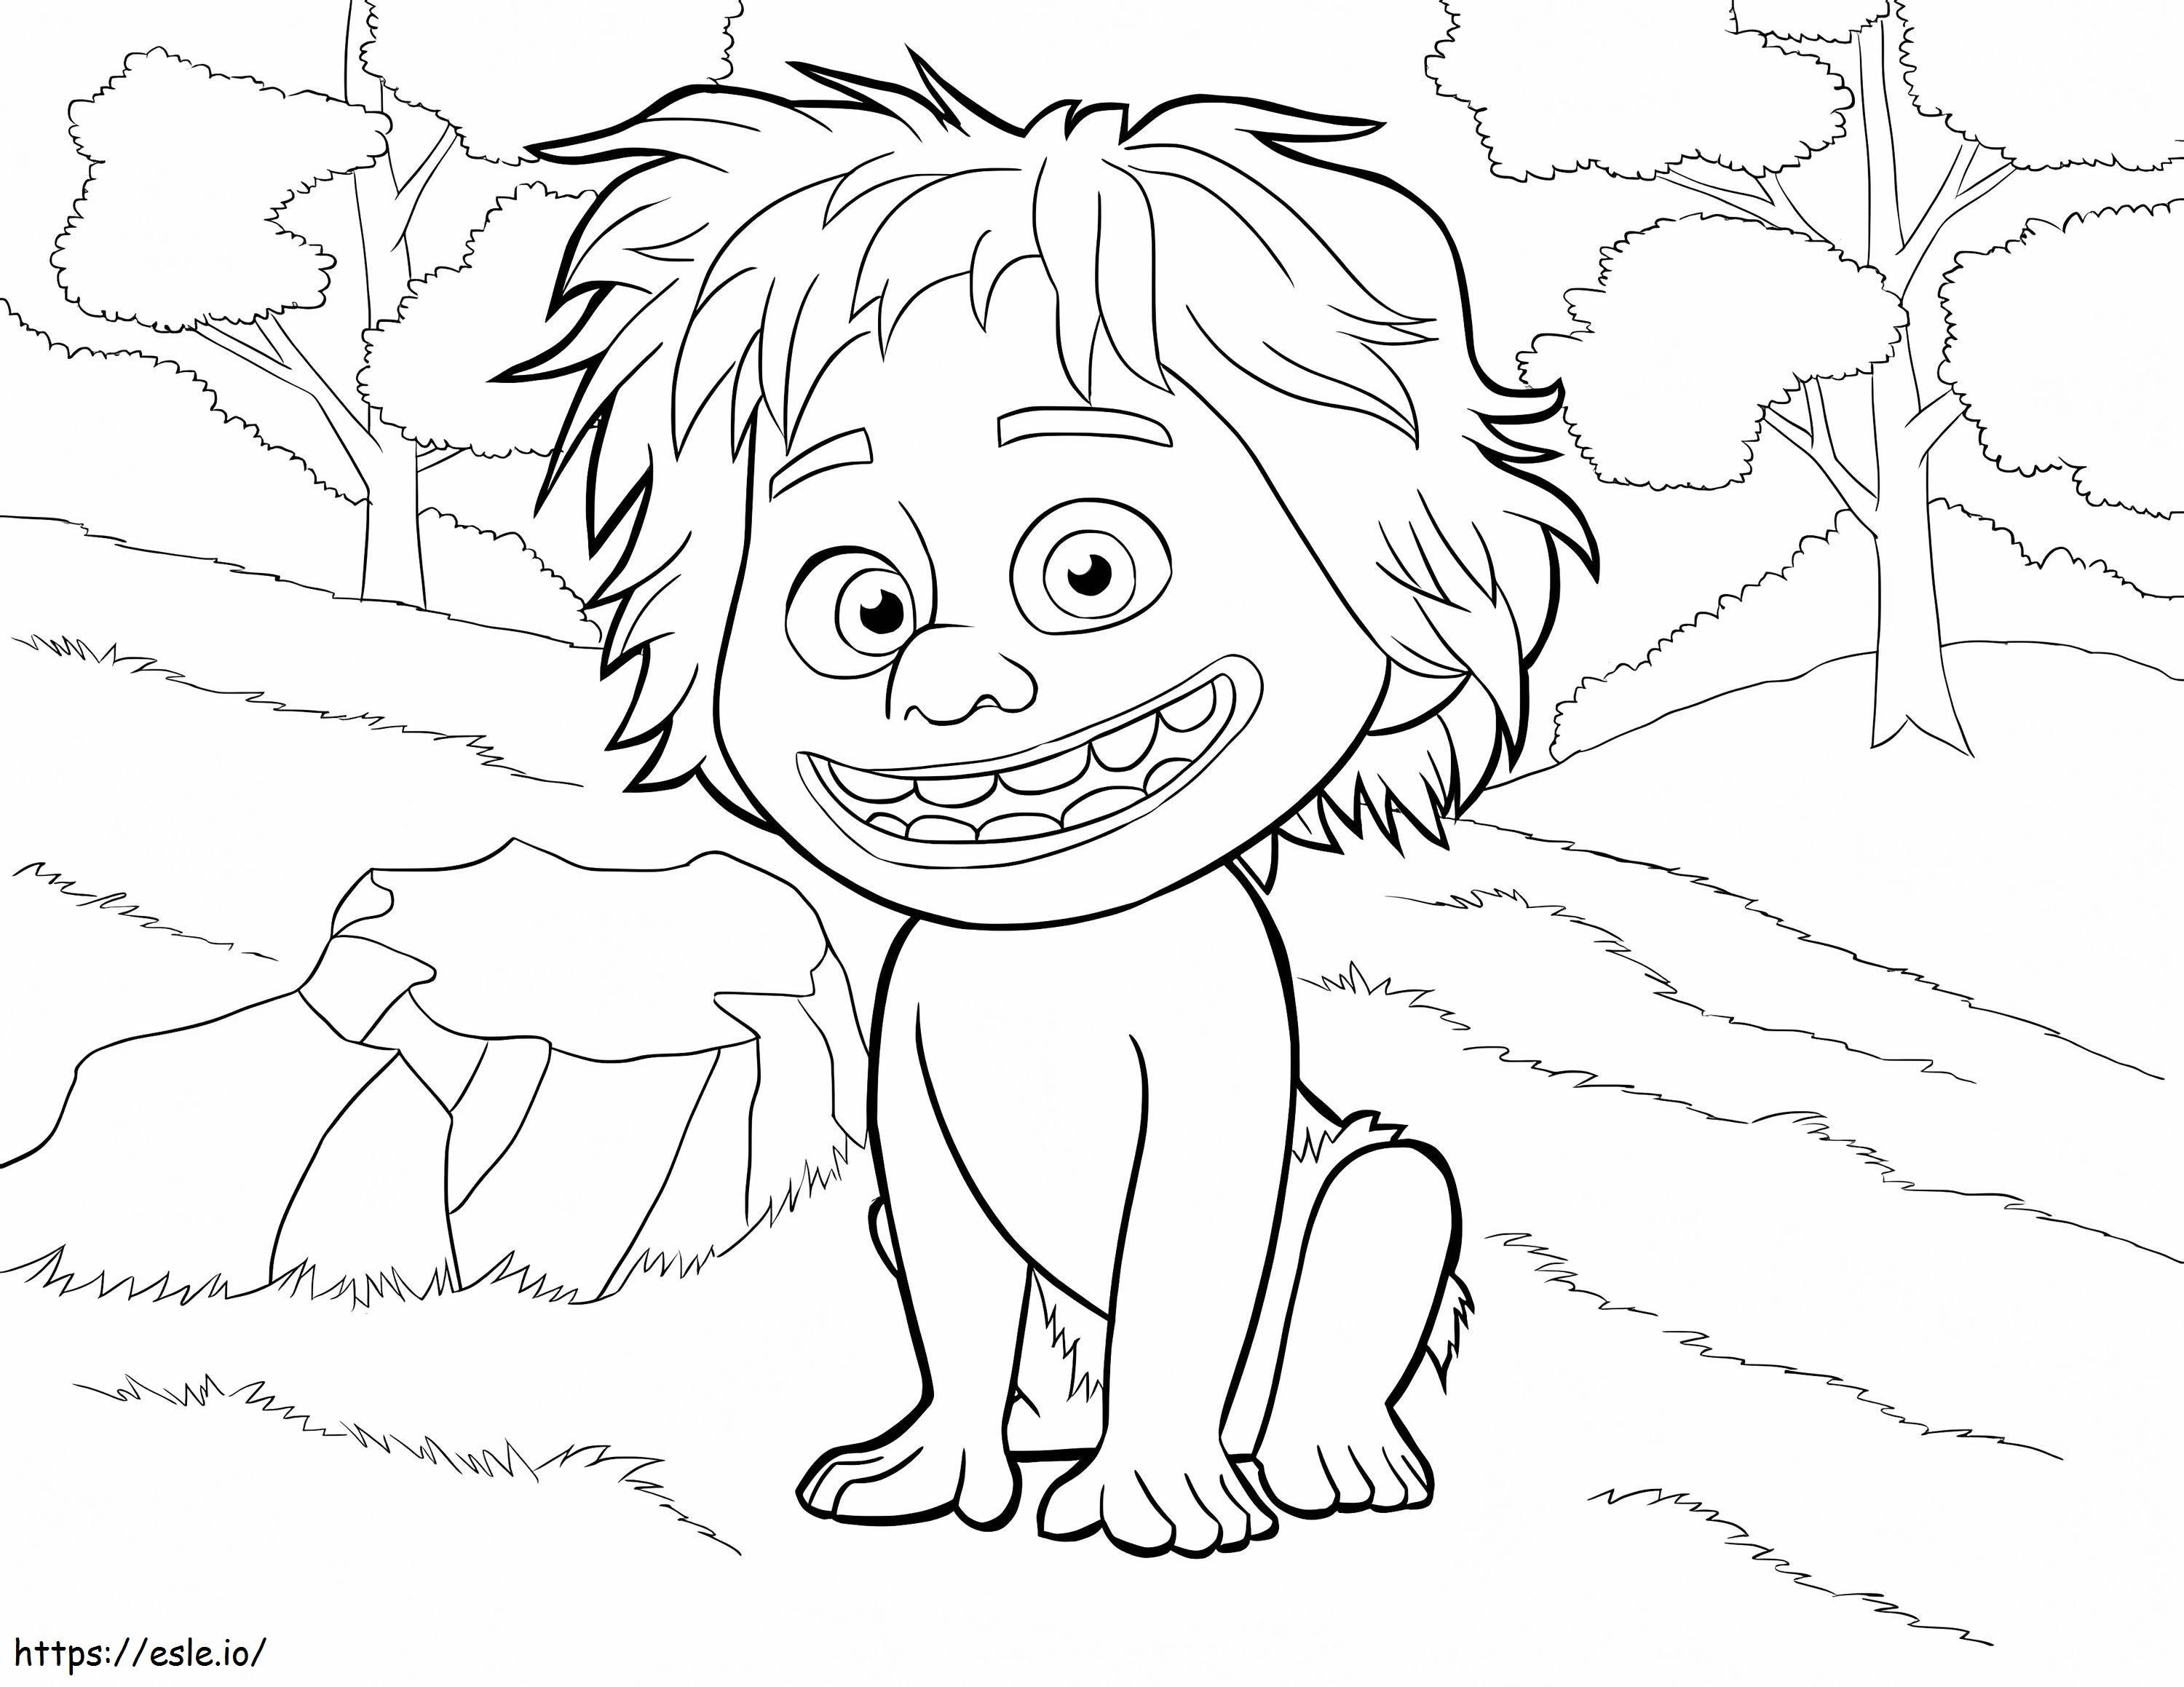 Spot From The Good Dinosaur coloring page